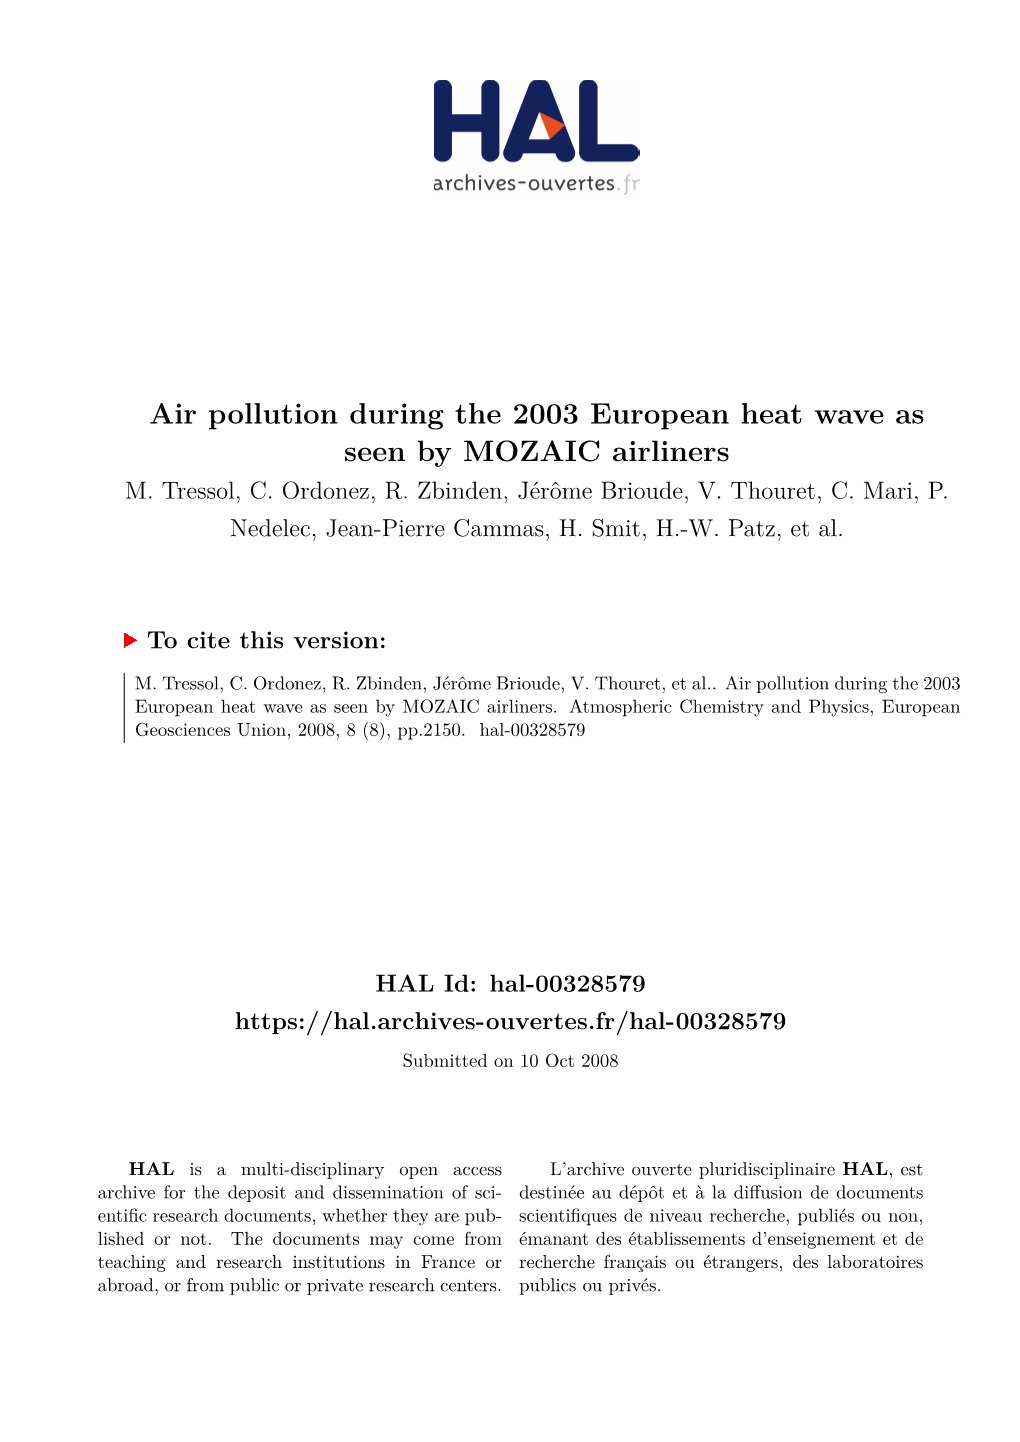 Air Pollution During the 2003 European Heat Wave As Seen by MOZAIC Airliners M